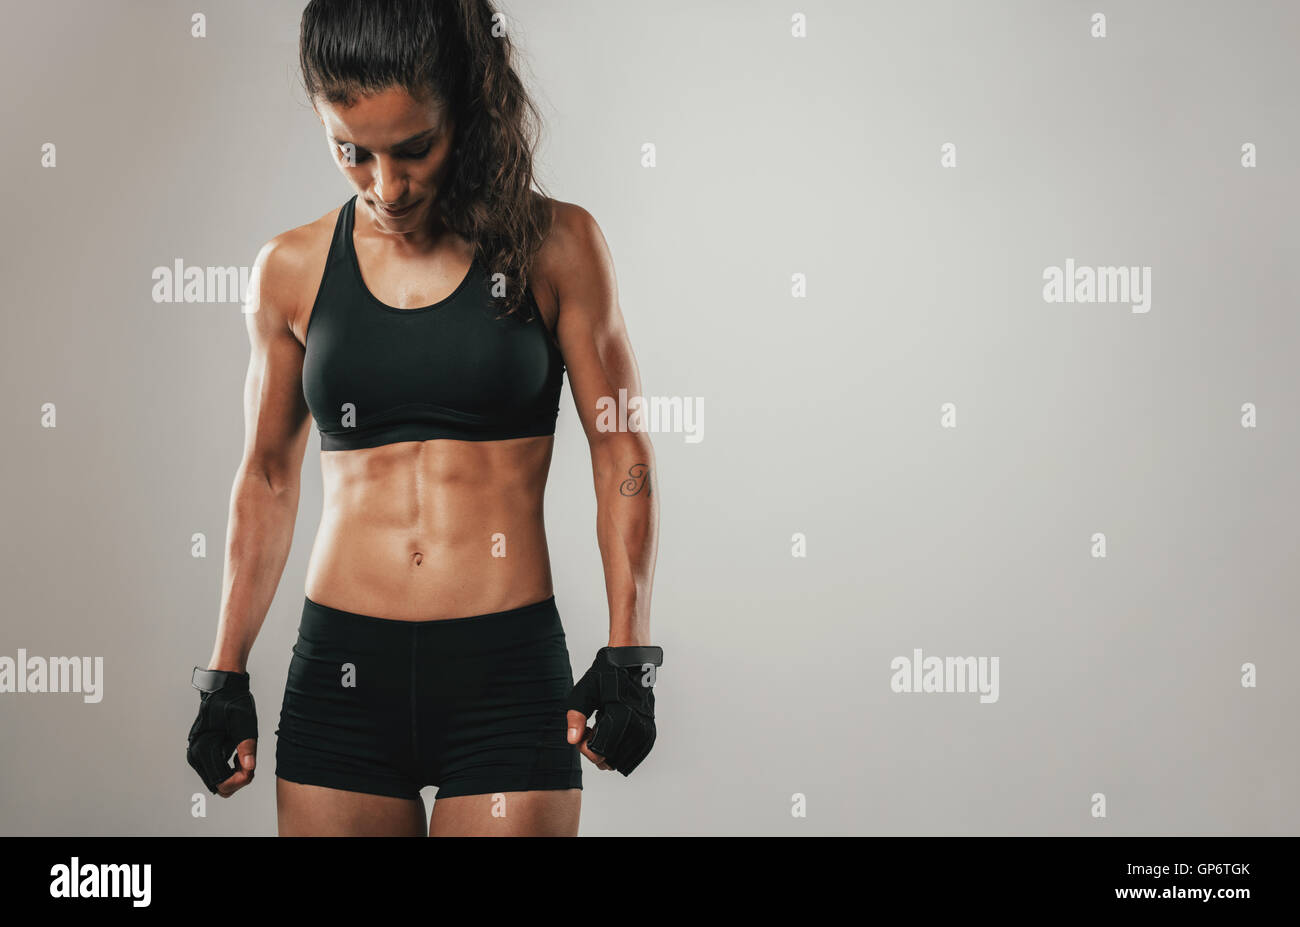 Fit healthy young female athlete with a toned strong body standing looking down, cropped three quarter view on grey with copy sp Stock Photo